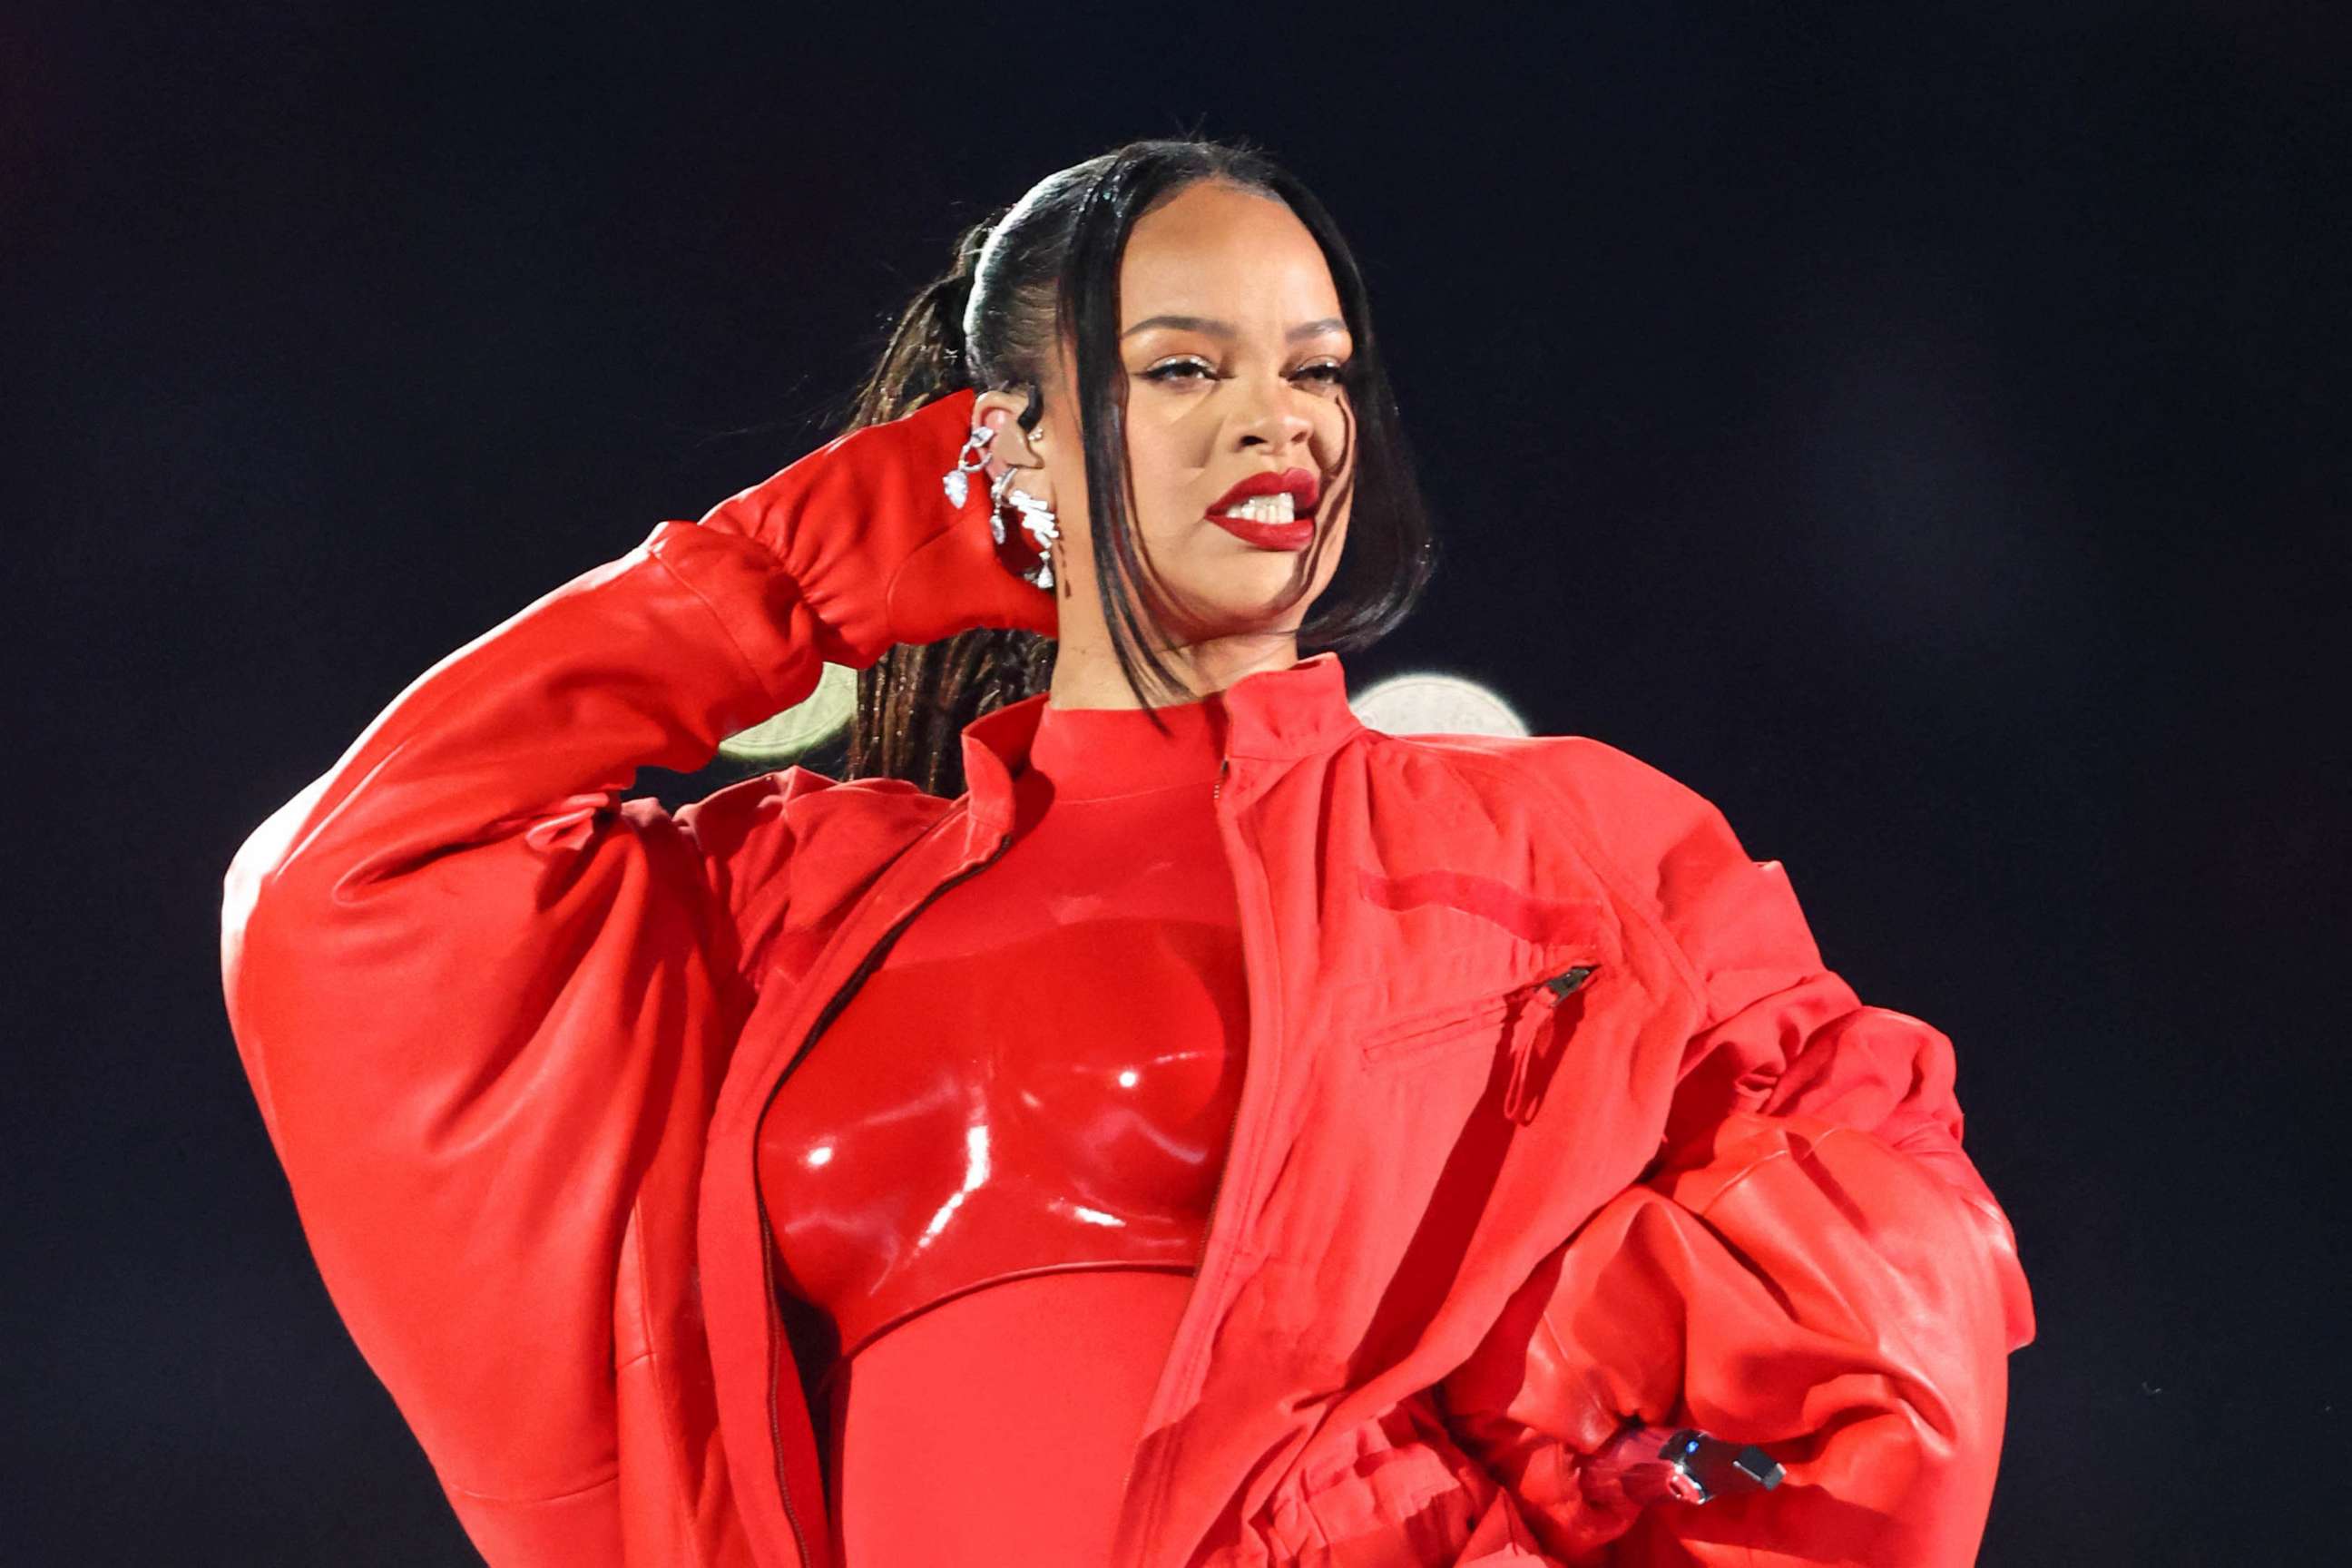 PHOTO: Rihanna performs during the halftime show of Super Bowl Feb. 12, 202, in Glendale, Ariz.